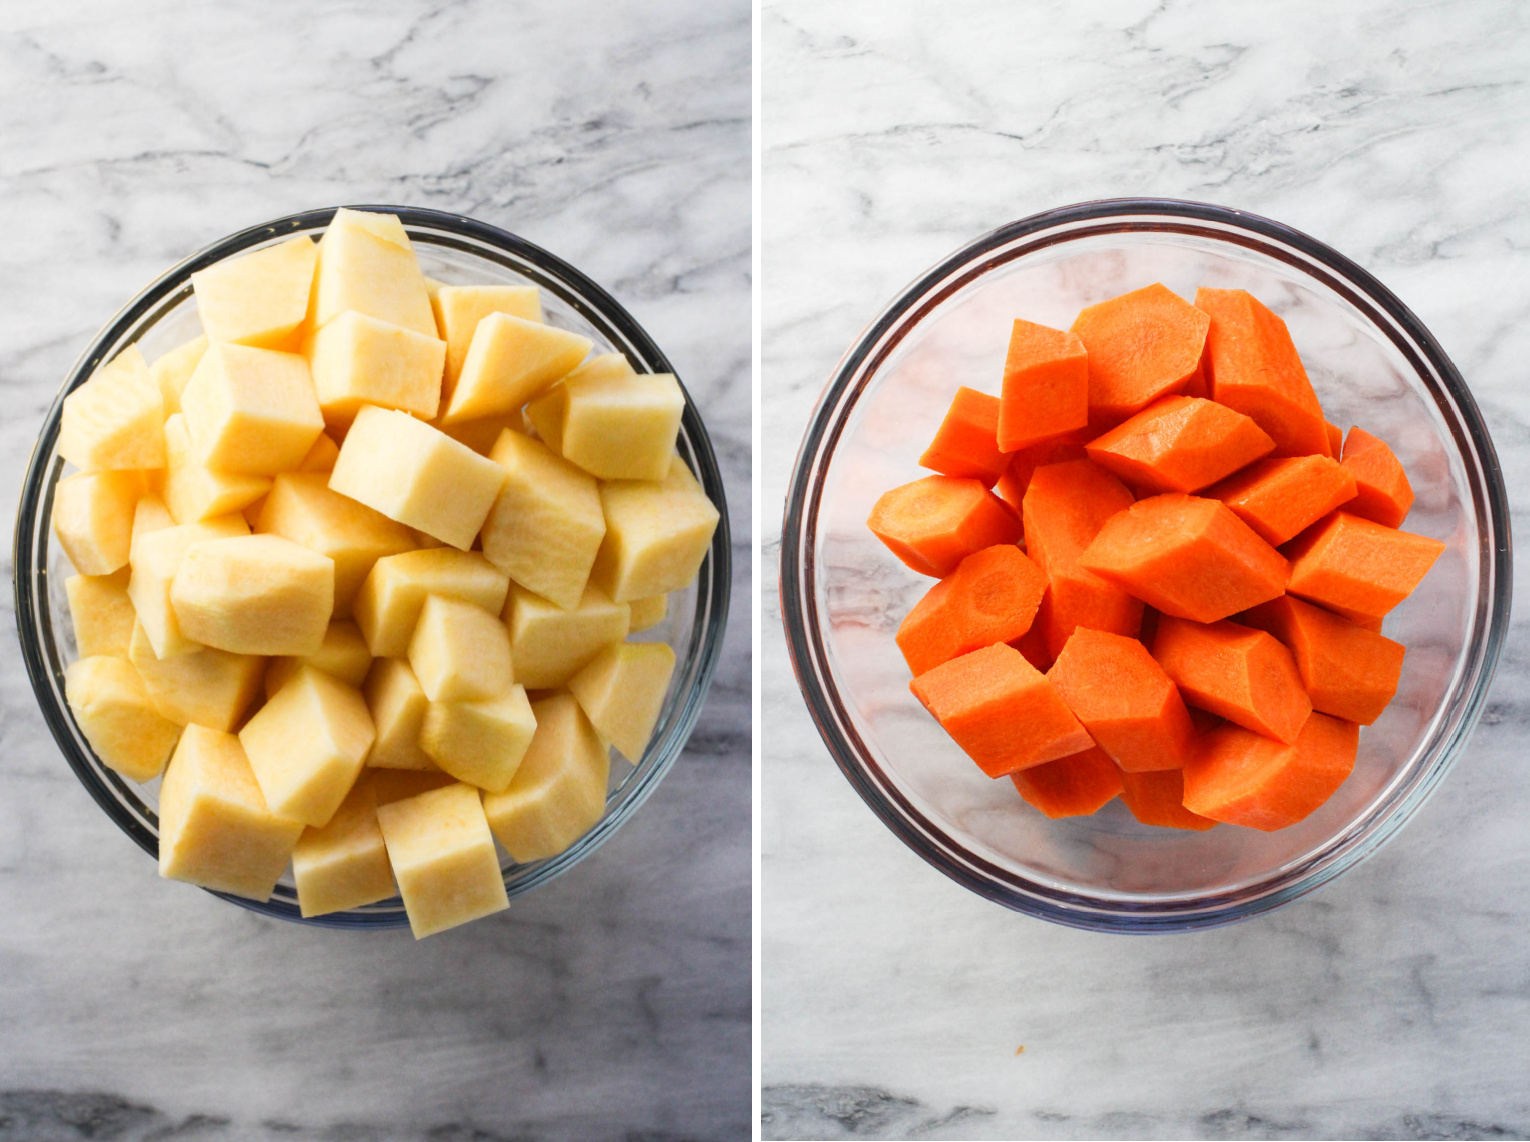 Two images side-by-side. On the left image, swede slices in a bowl. On the right image, carrot sliced in a bowl.